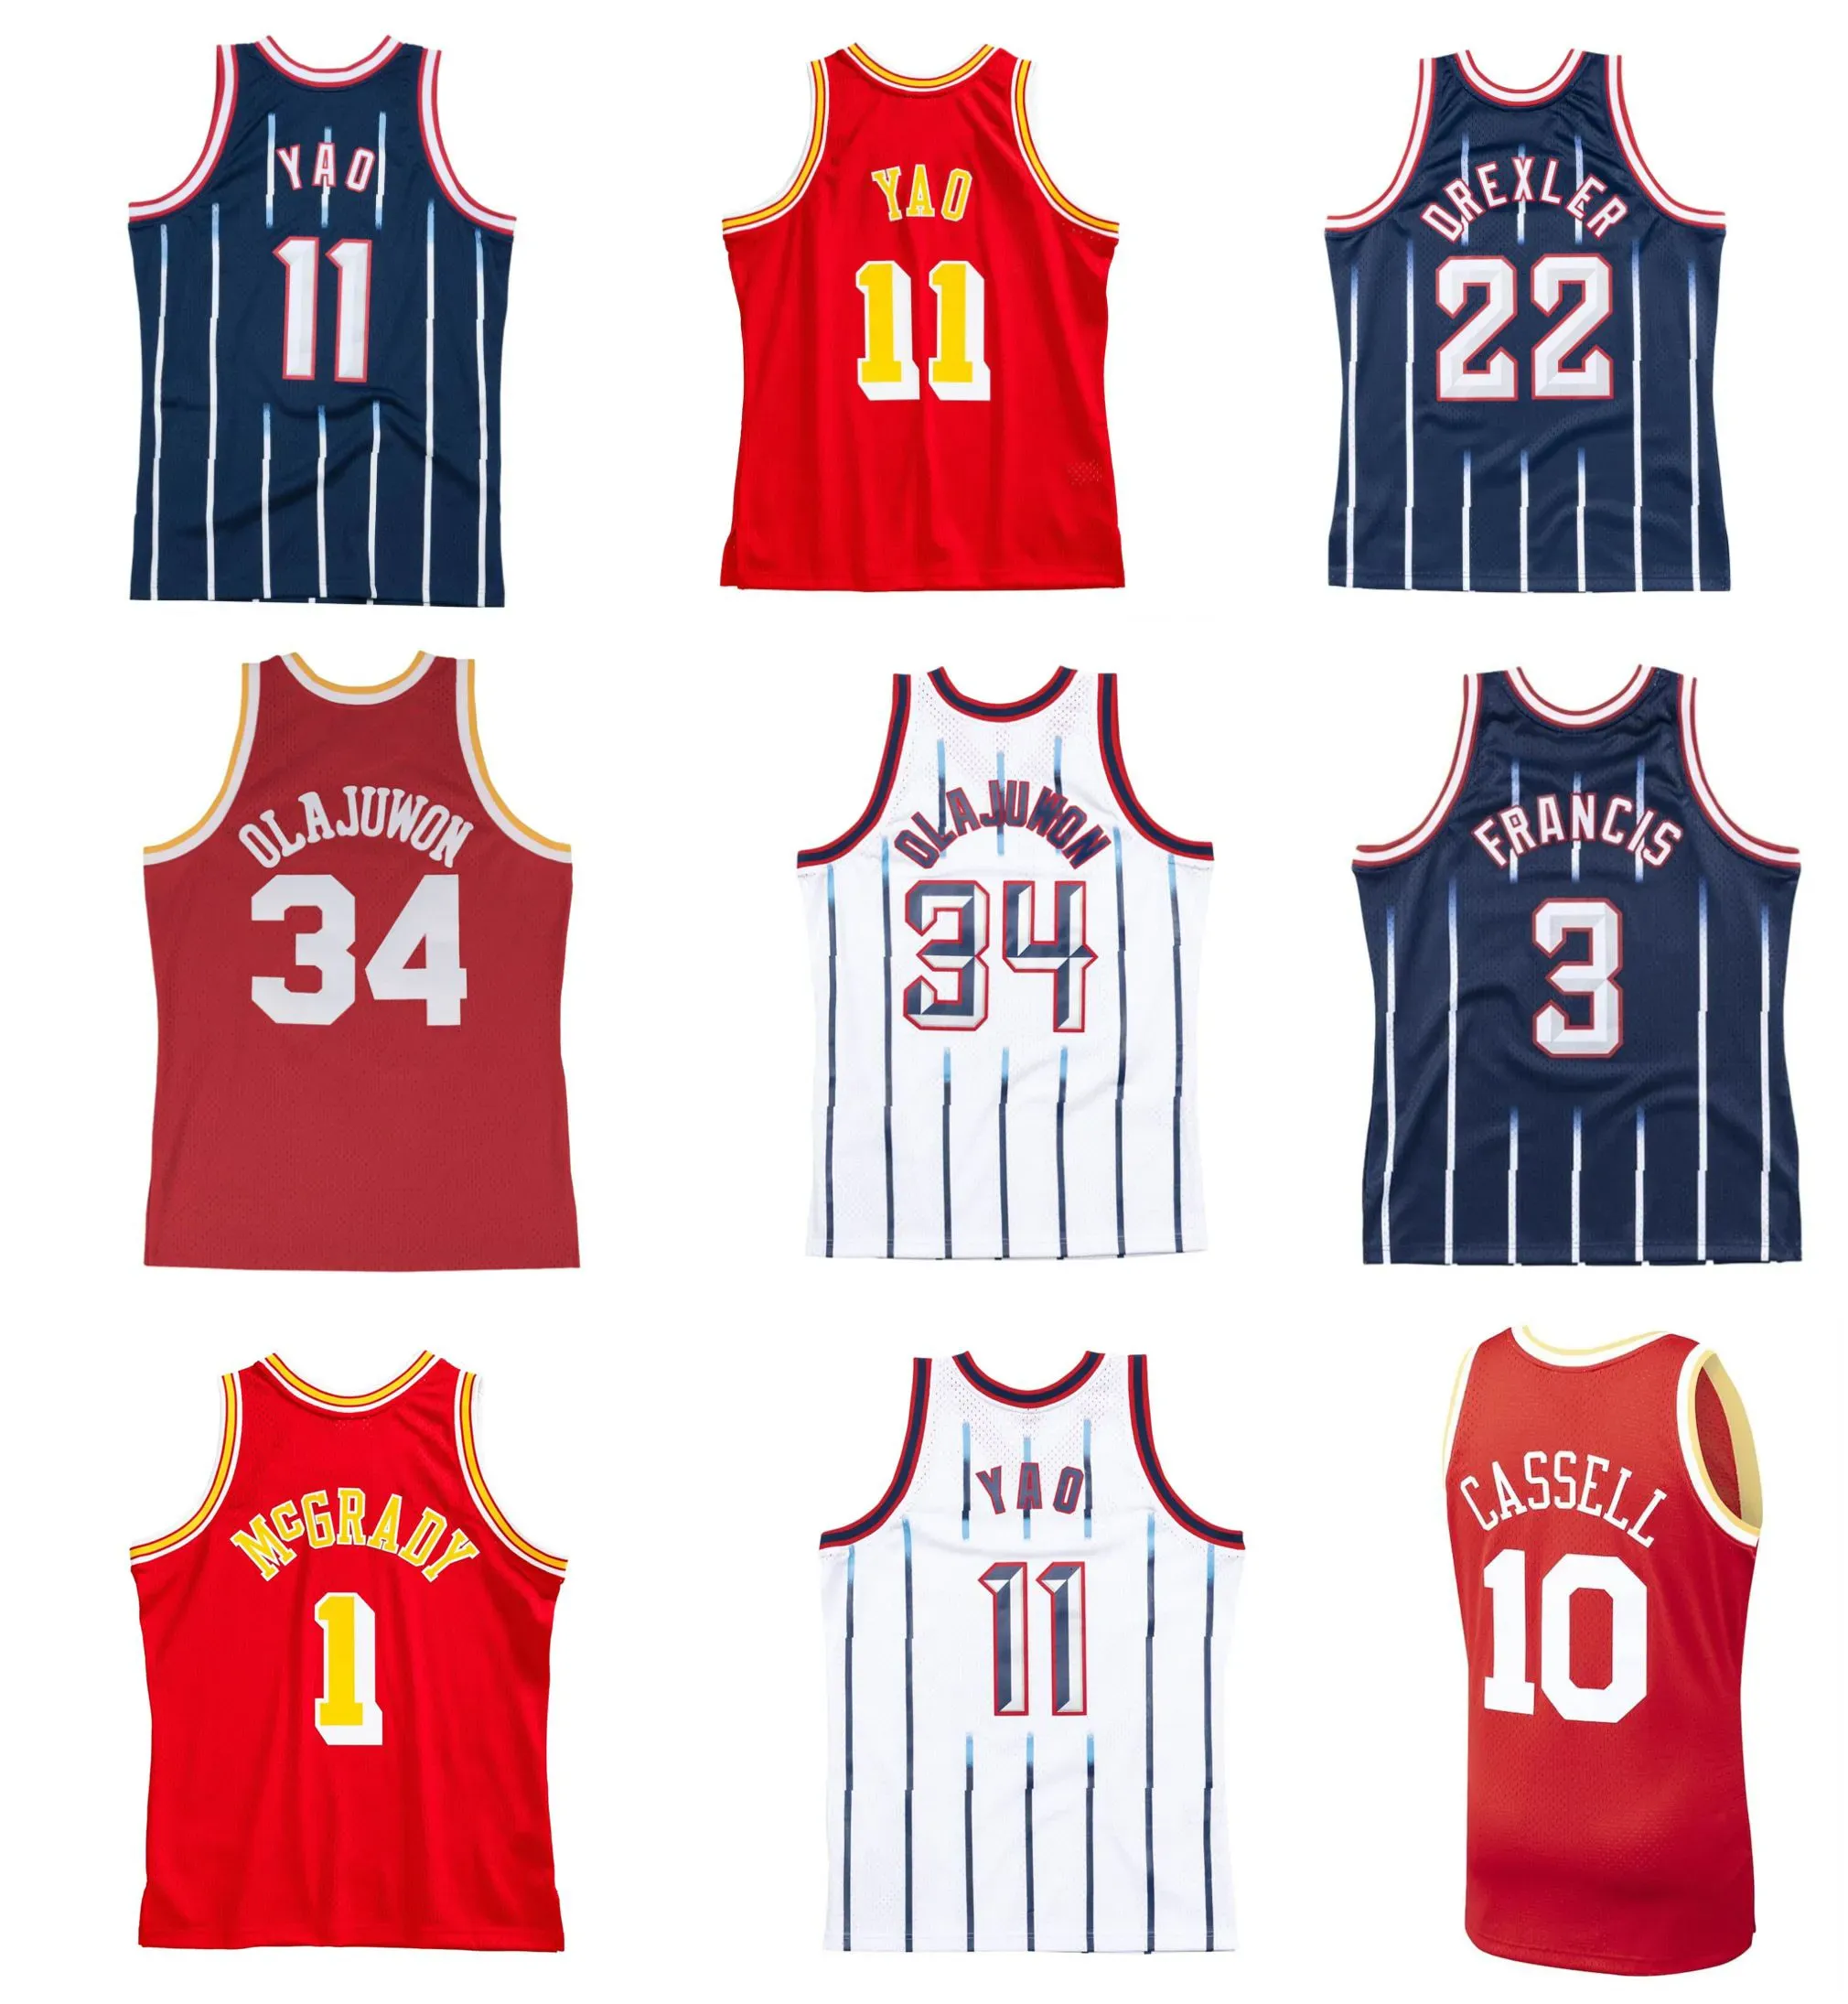 Houston''Rockets''Yao Ming Basketball Jersey Hakeem Olajuwon Tracy McGrady Francis Clyde Drexler Cassell Elie Mitchell and Ness Throwback Red S-XXL